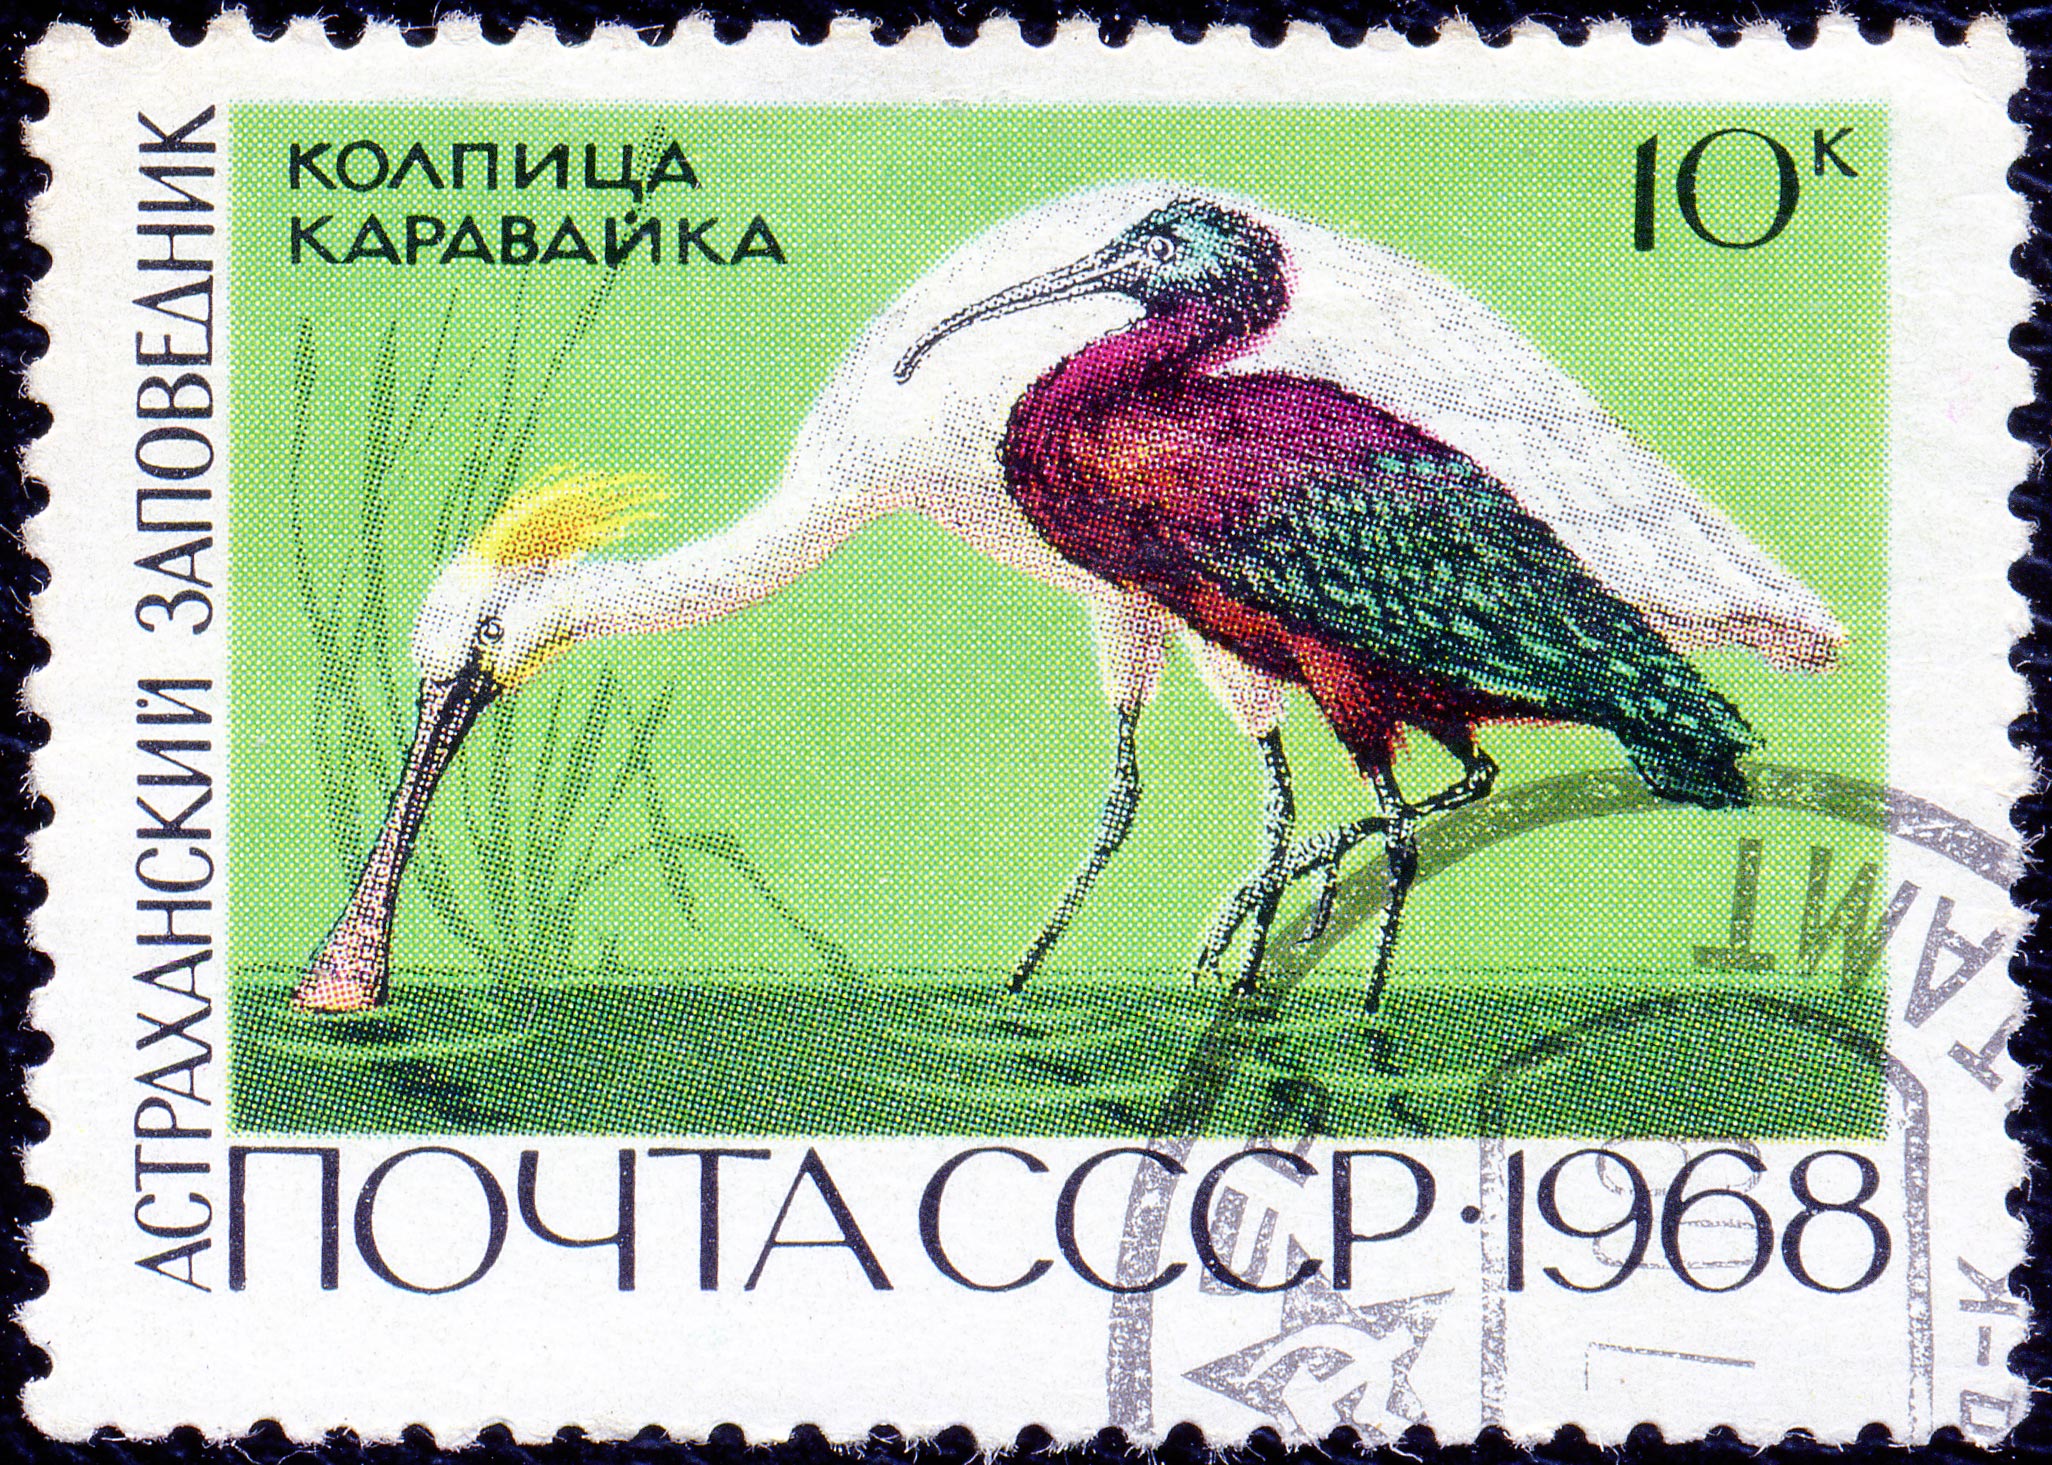 The Soviet Union 1968 CPA 3676 stamp (Eurasian Spoonbill and Glossy Ibis (Astrakhan Nature Reserve)) cancelled light